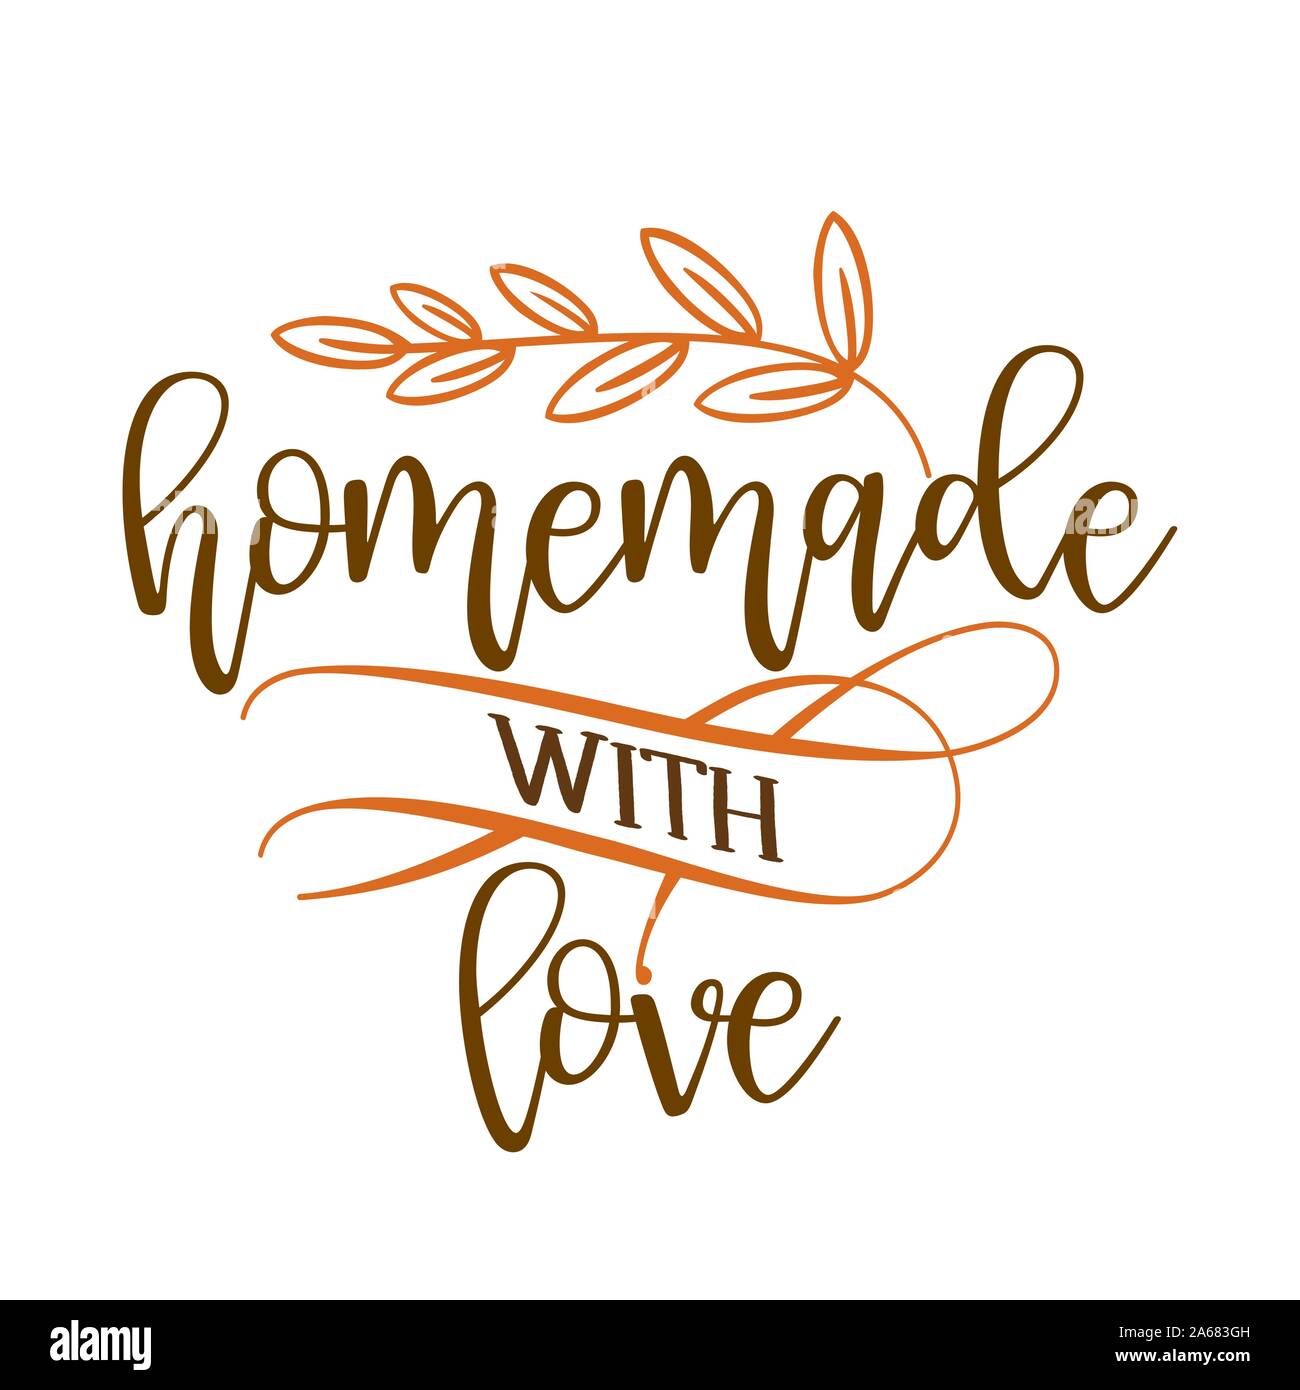 Homemade with love - stamp for homemade products and shops. Vector badge, label. Vector Illustration on a white background Stock Vector